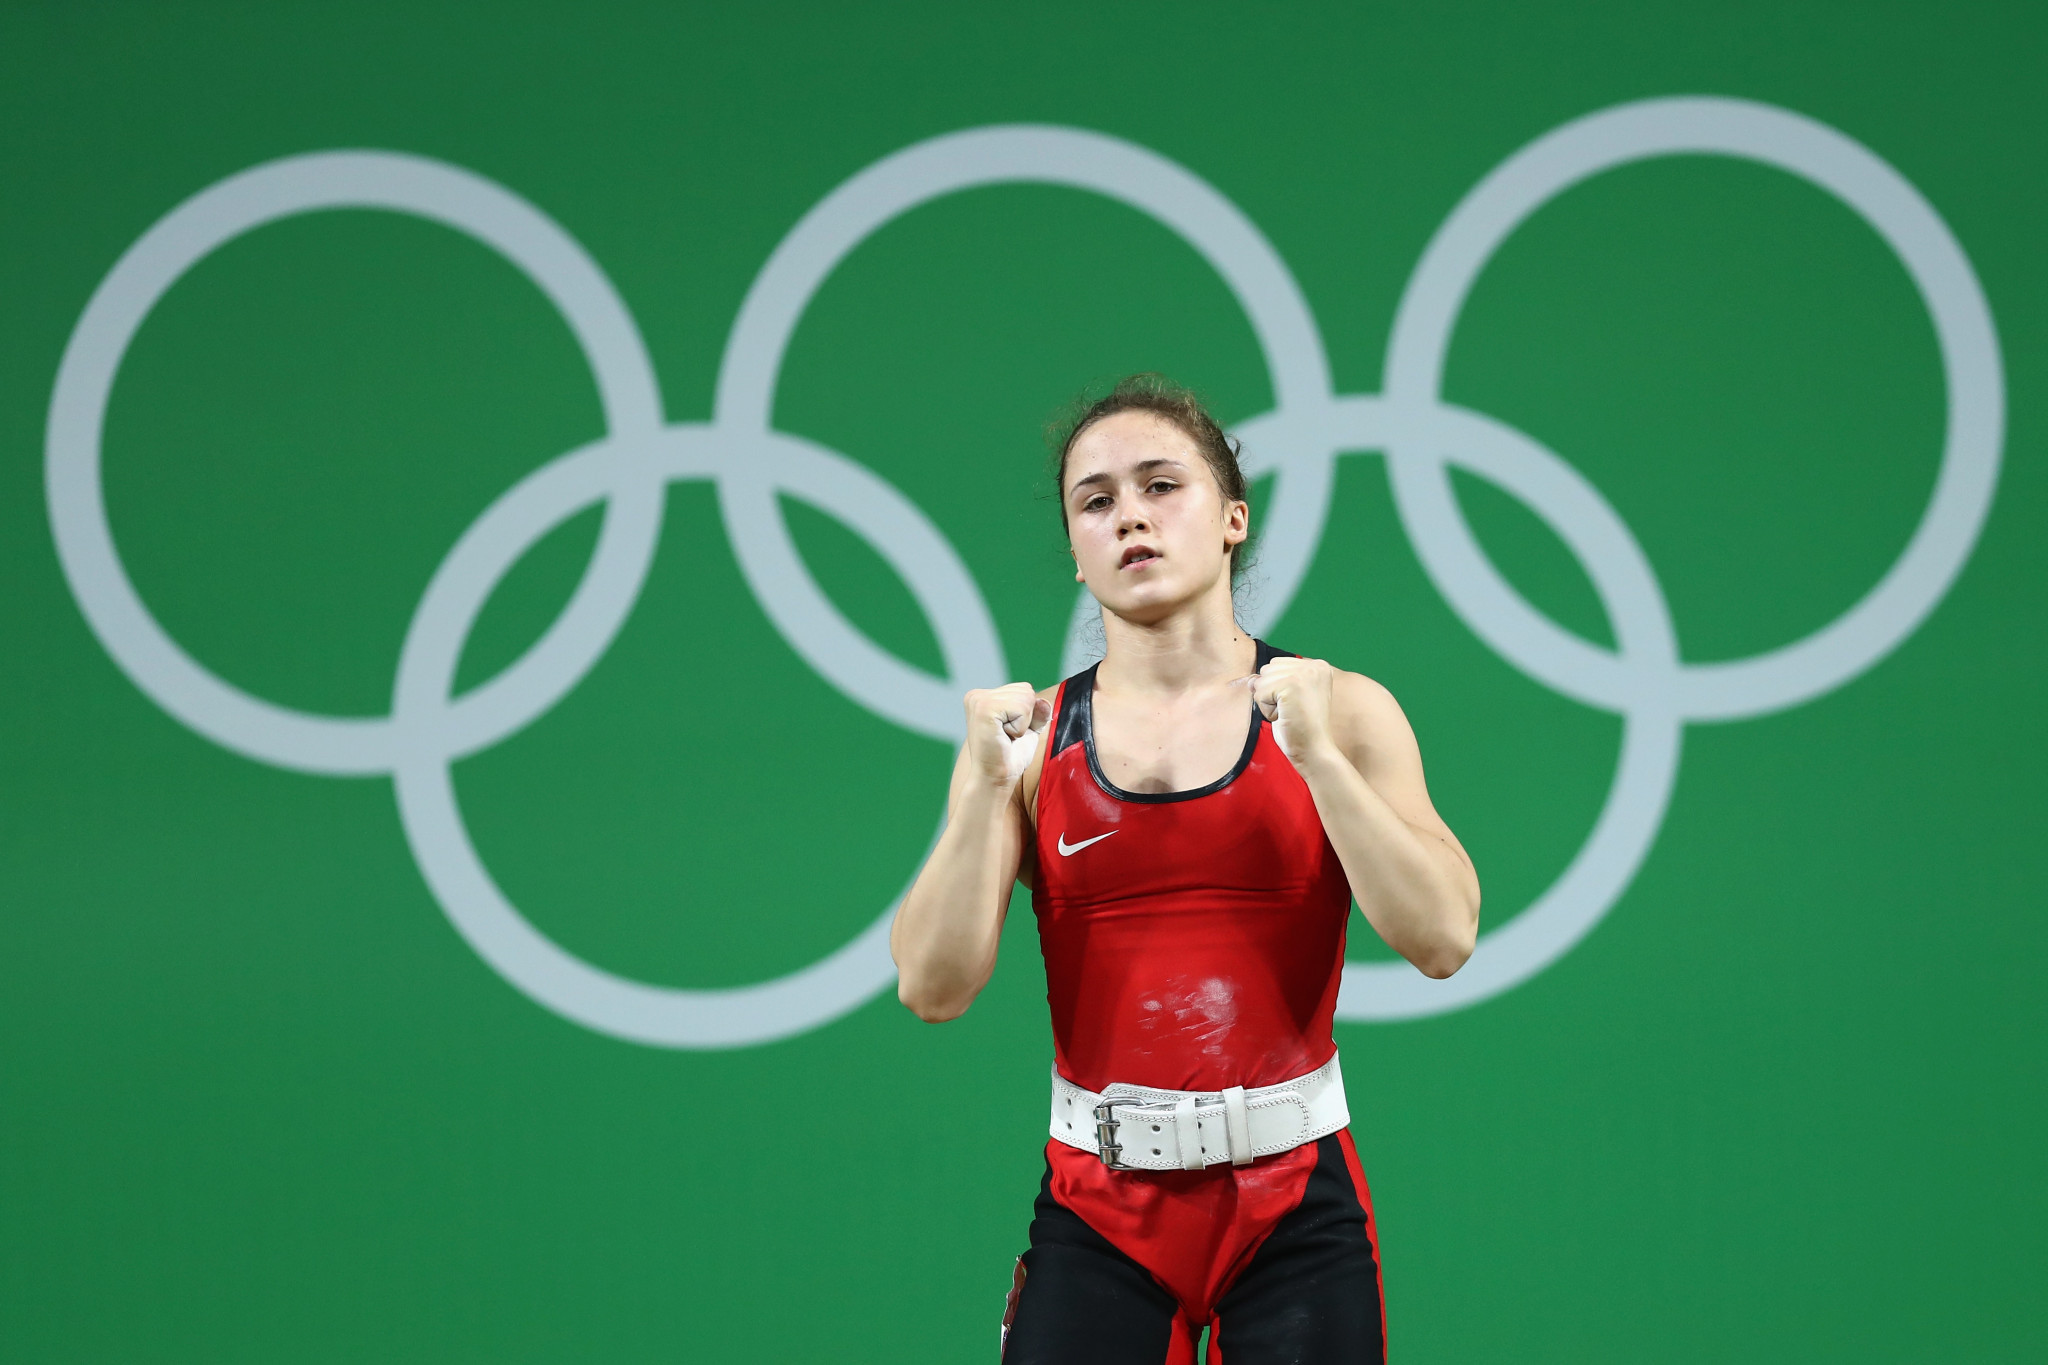 Rebeka Salsabil Ibrahim, who competed for Latvia as Rebeka Koha, is hoping to return to weightlifting ©Getty Images